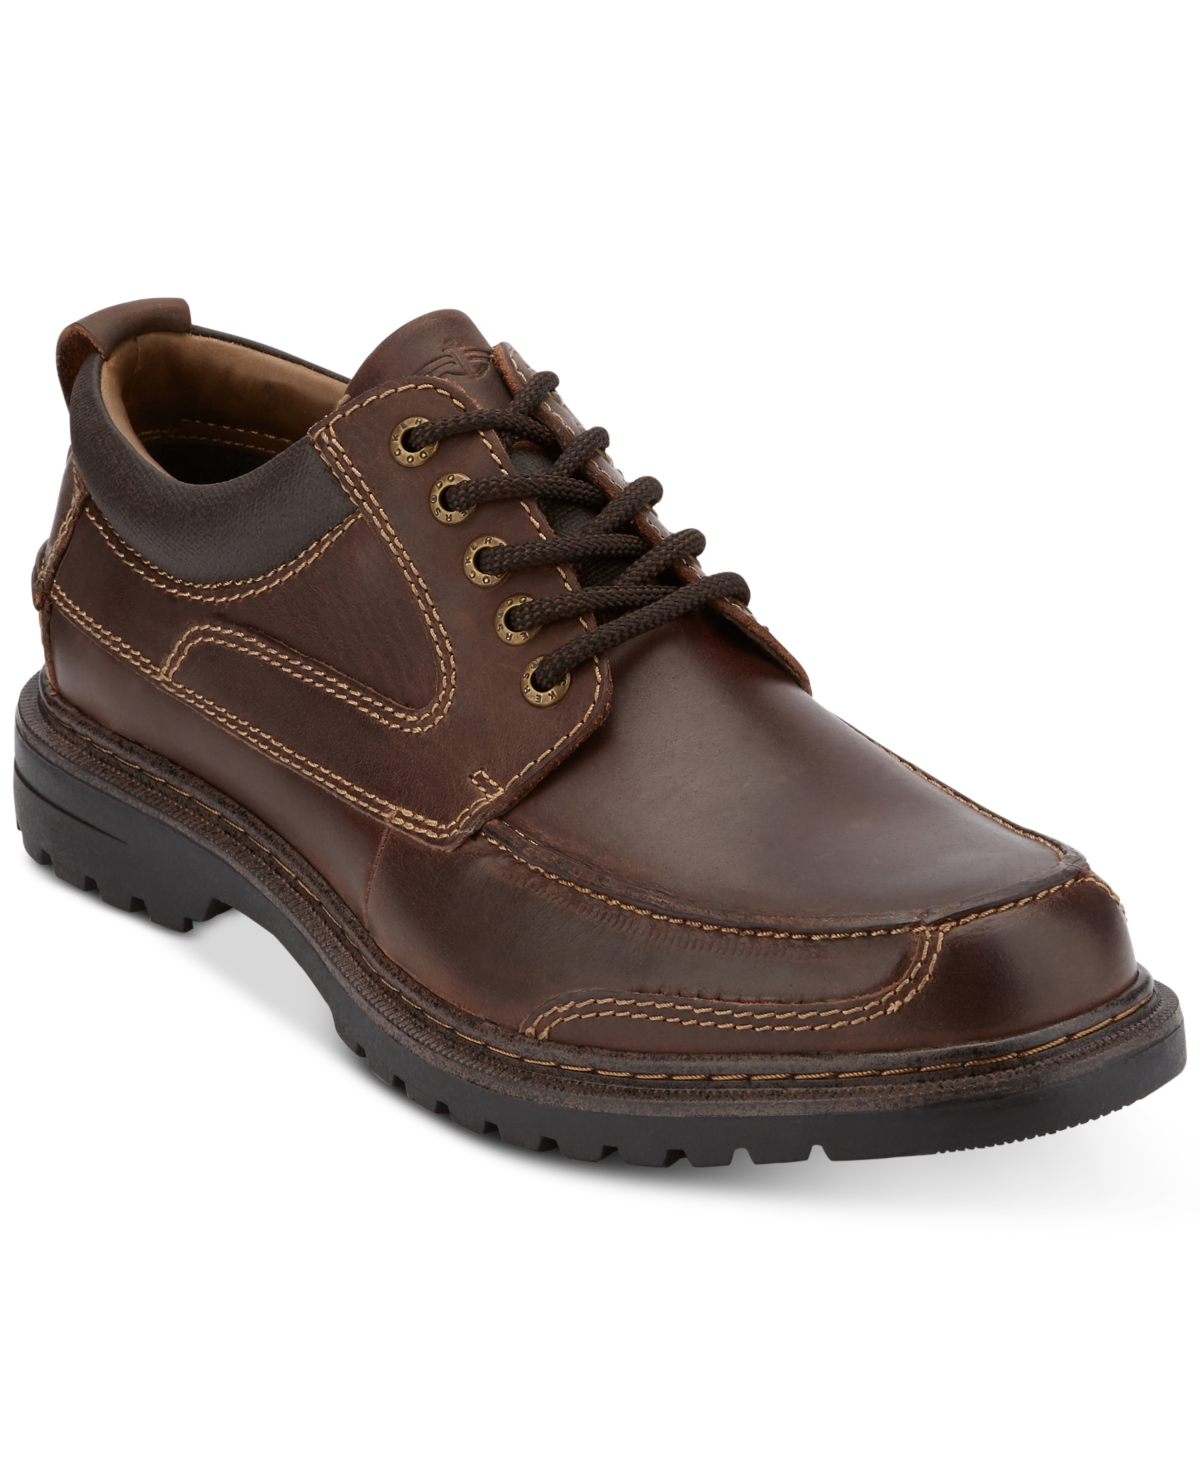 Men's Overton Moc-Toe Leather Oxfords - Red Brown